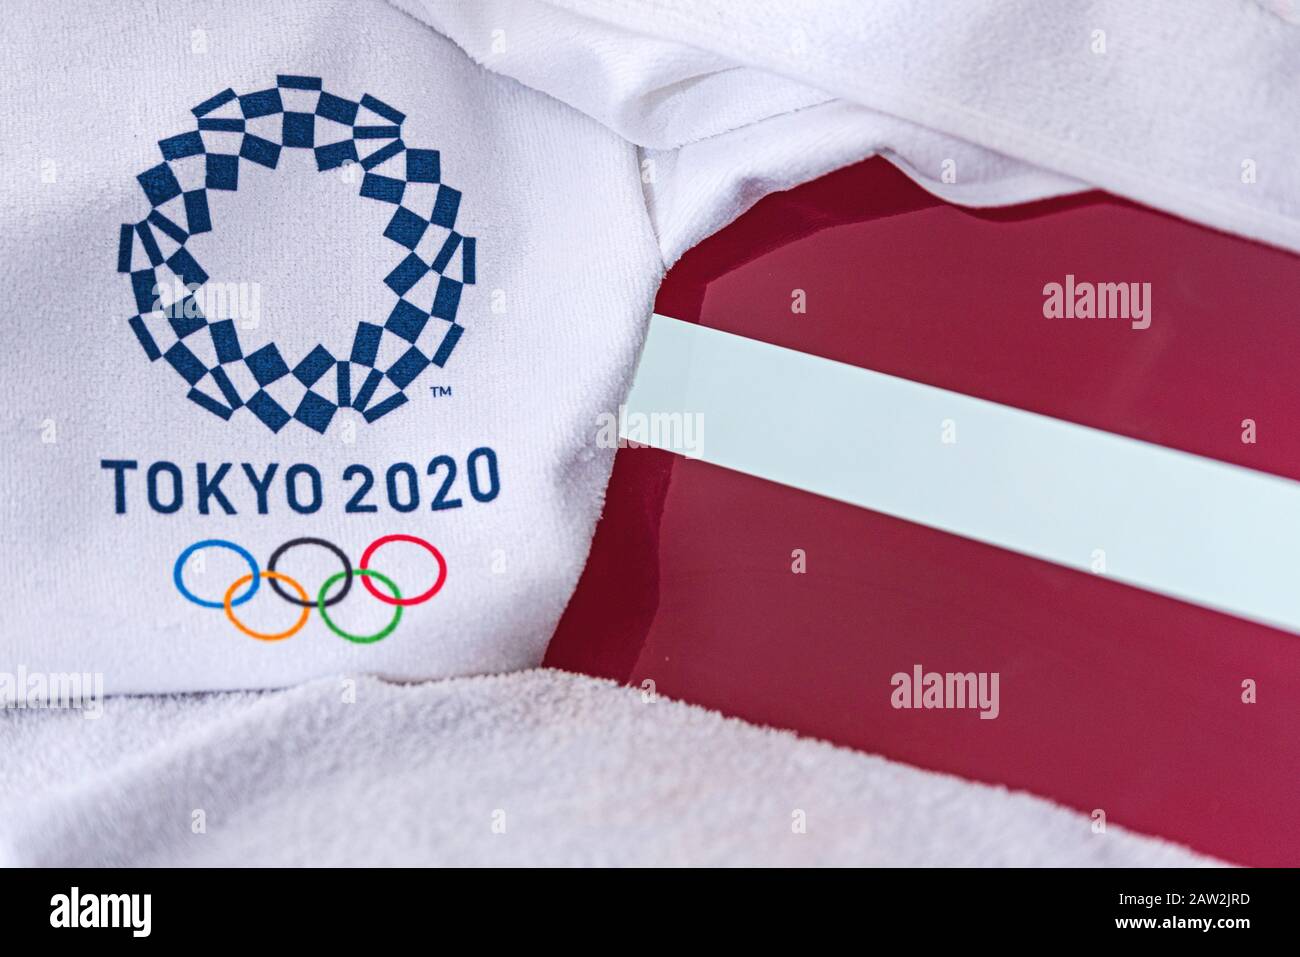 TOKYO, JAPAN, FEBRUARY. 4, 2020: Latvia National flag, official logo of summer olympic games in Tokyo 2020. White background Stock Photo